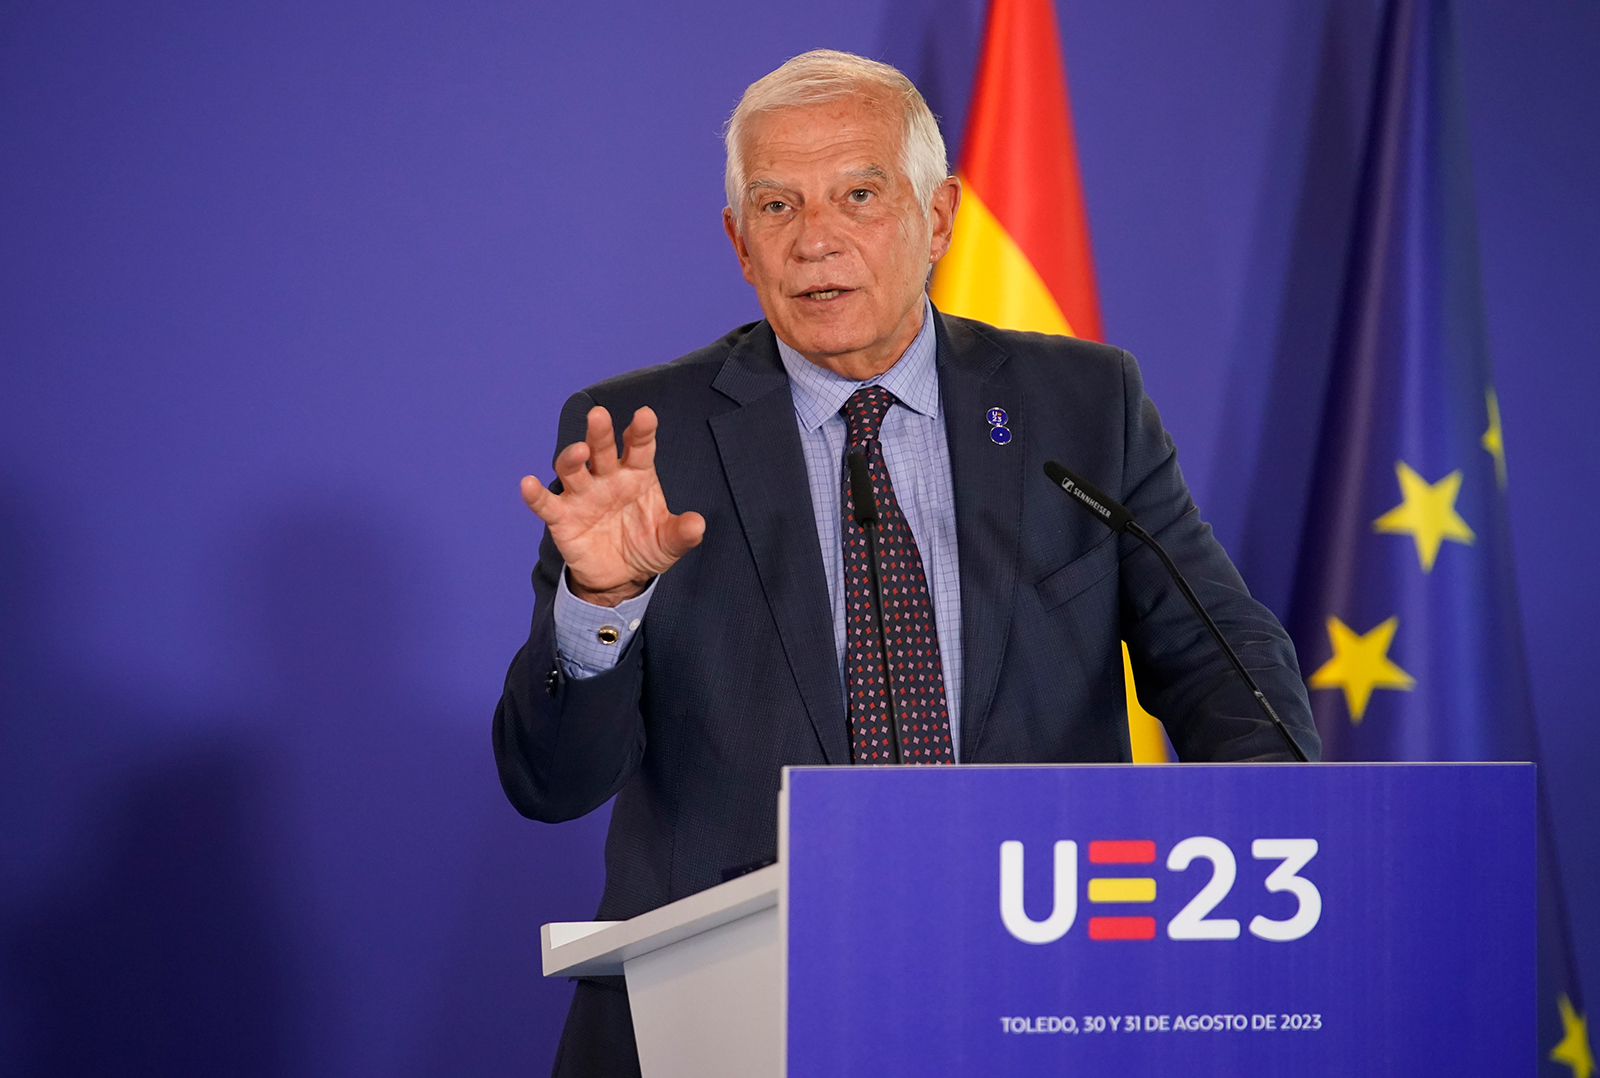 Josep Borrell speaks during a conference at the EU foreign ministers meeting in Toledo, Spain, on August 31.